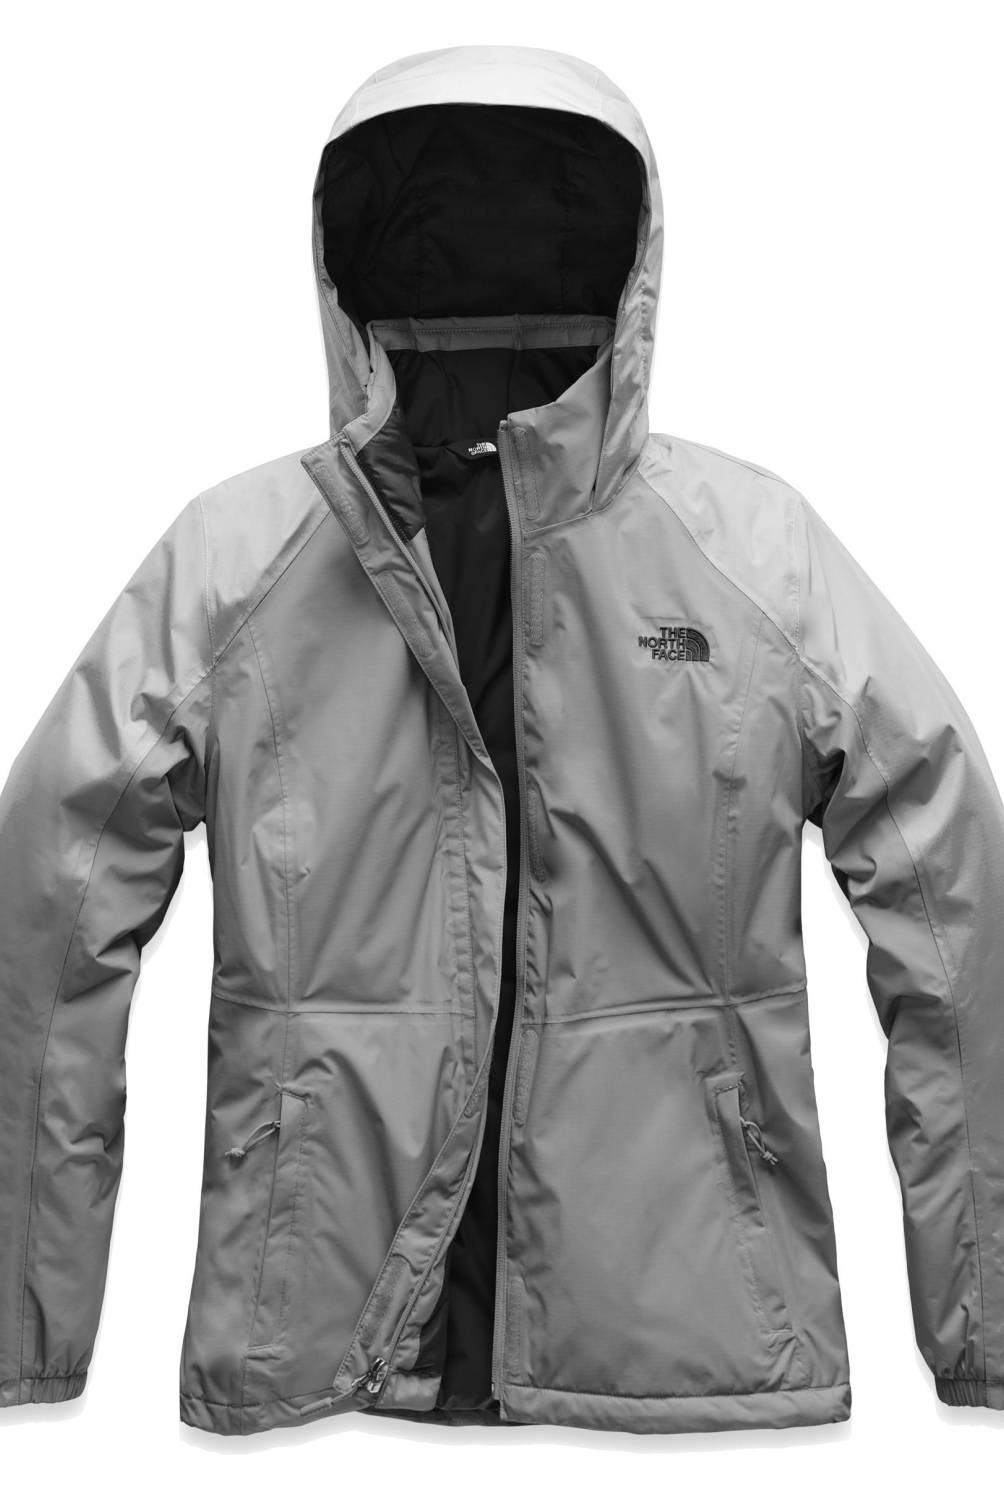 THE NORTH FACE - Cortaviento Outdoor Resolve Mujer